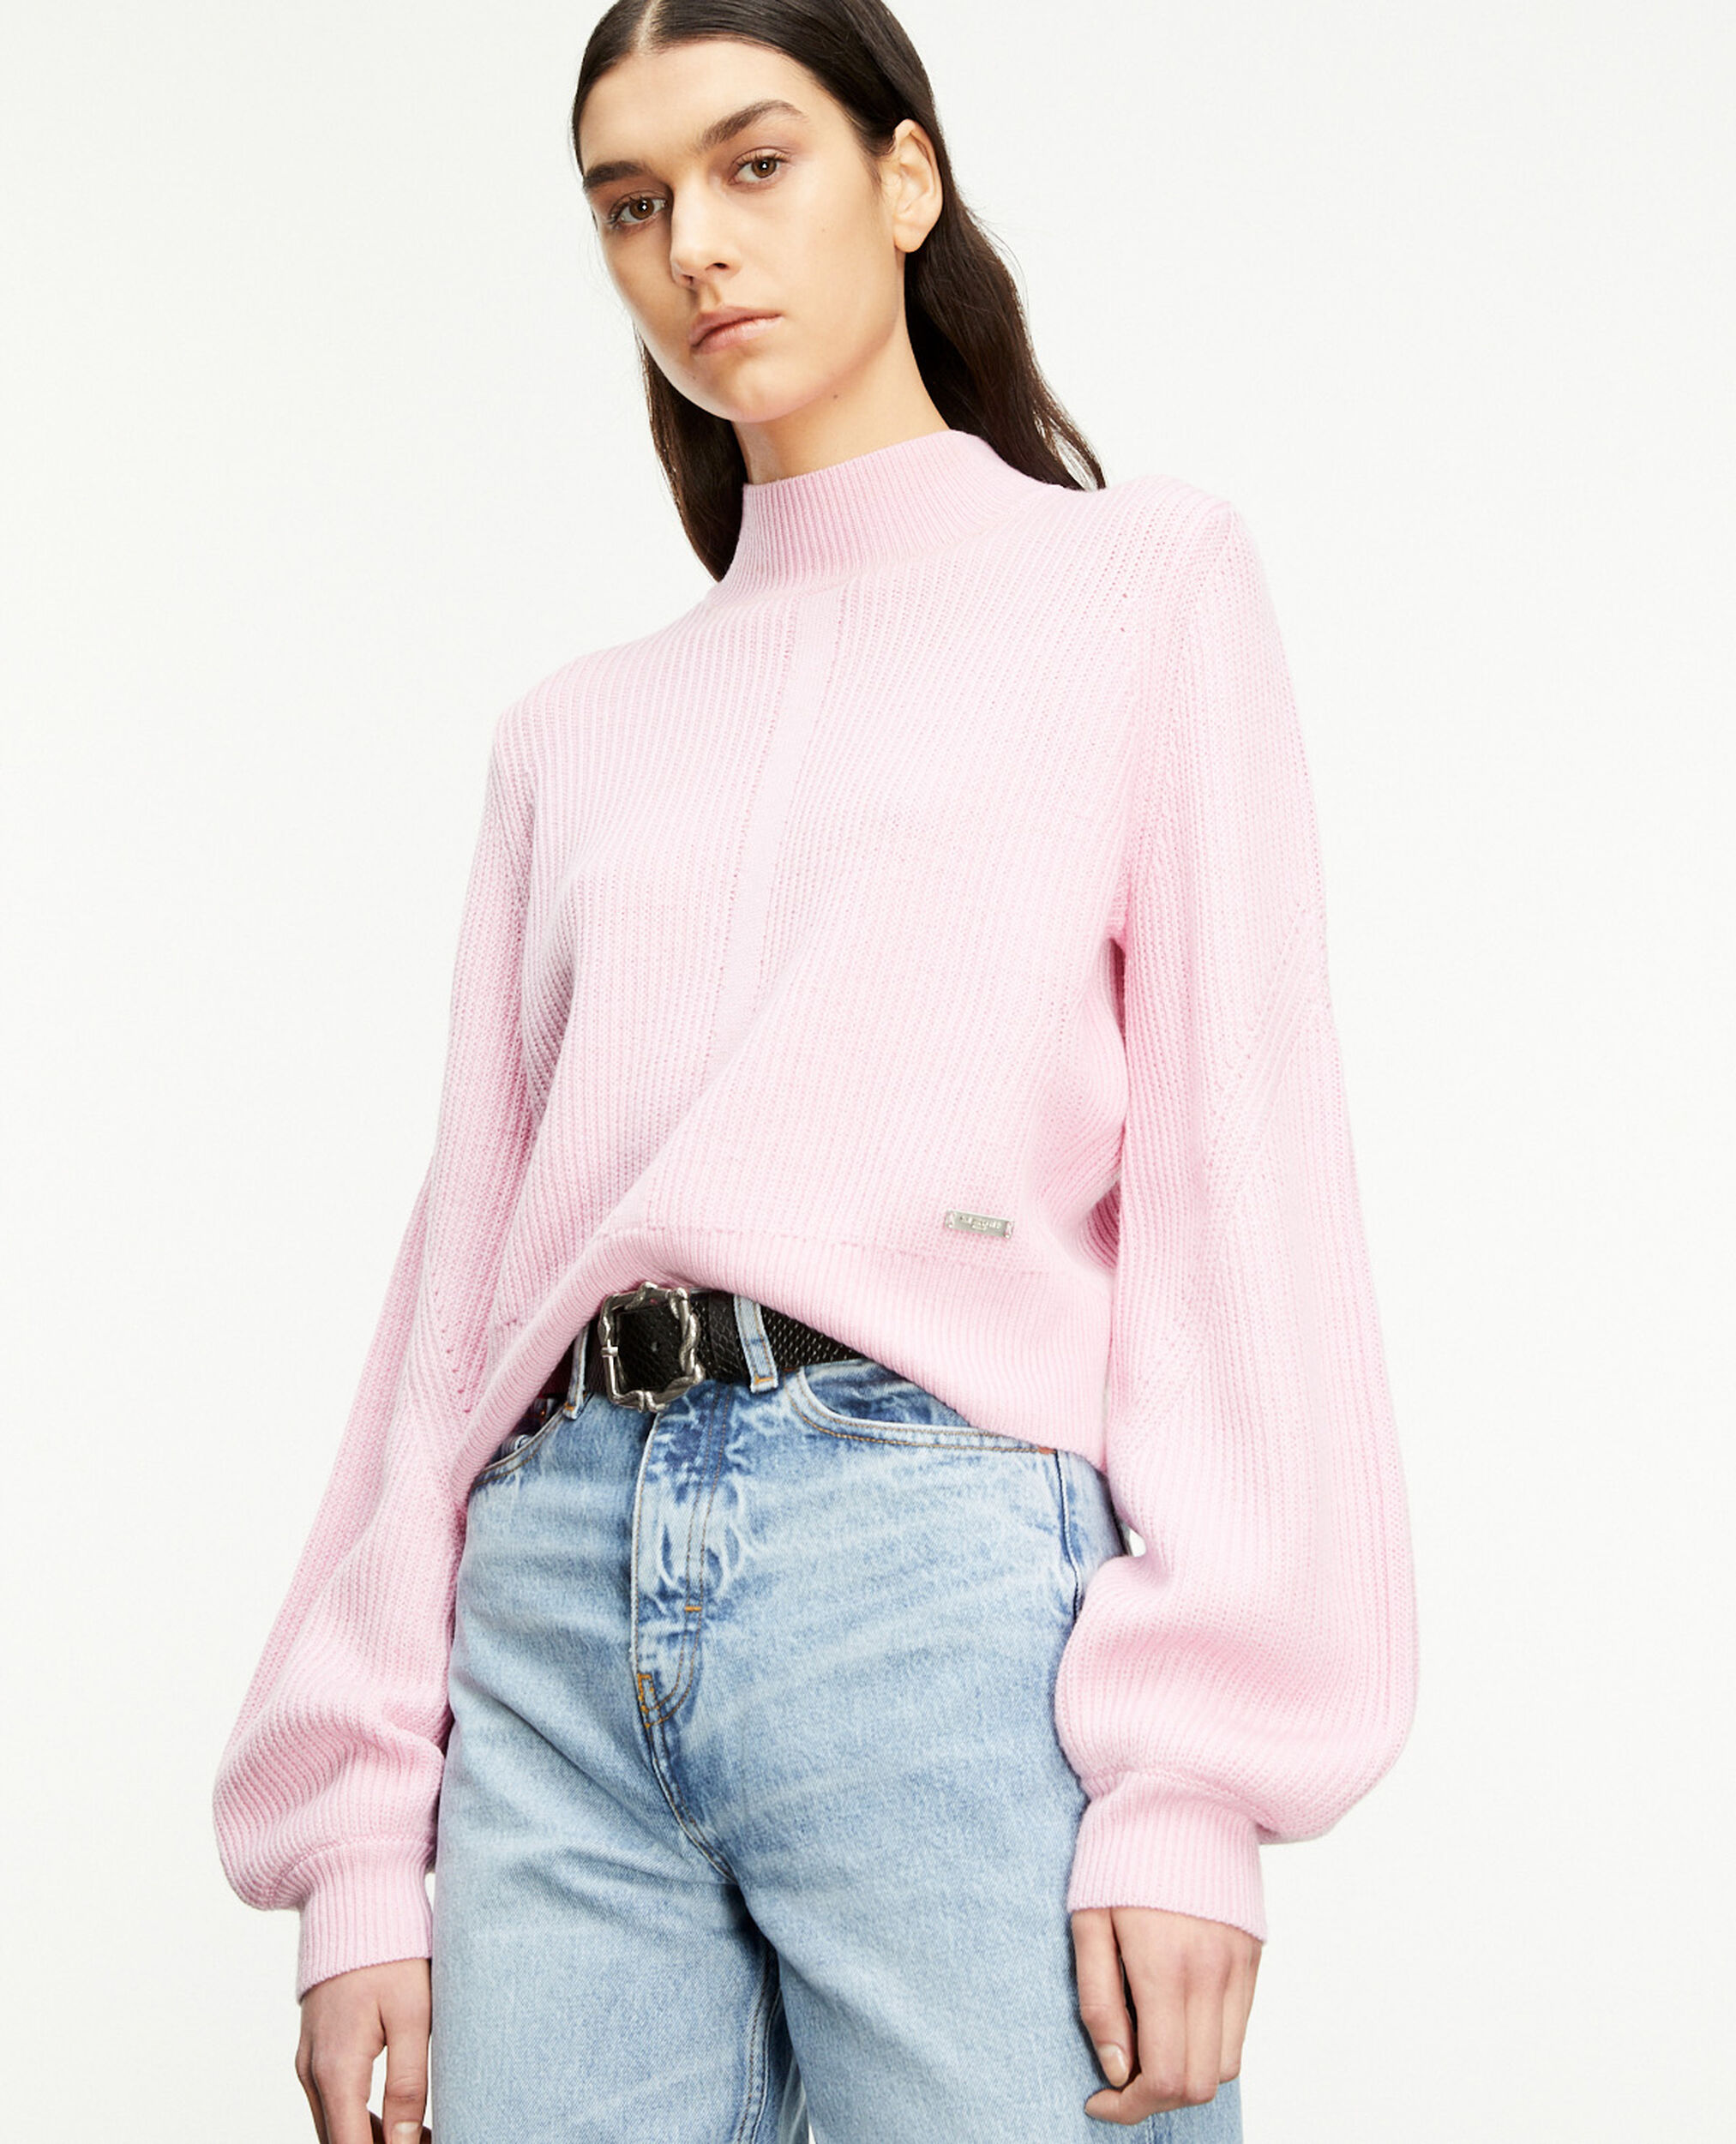 Pull laine mérinos rose clair ample, PINK, hi-res image number null